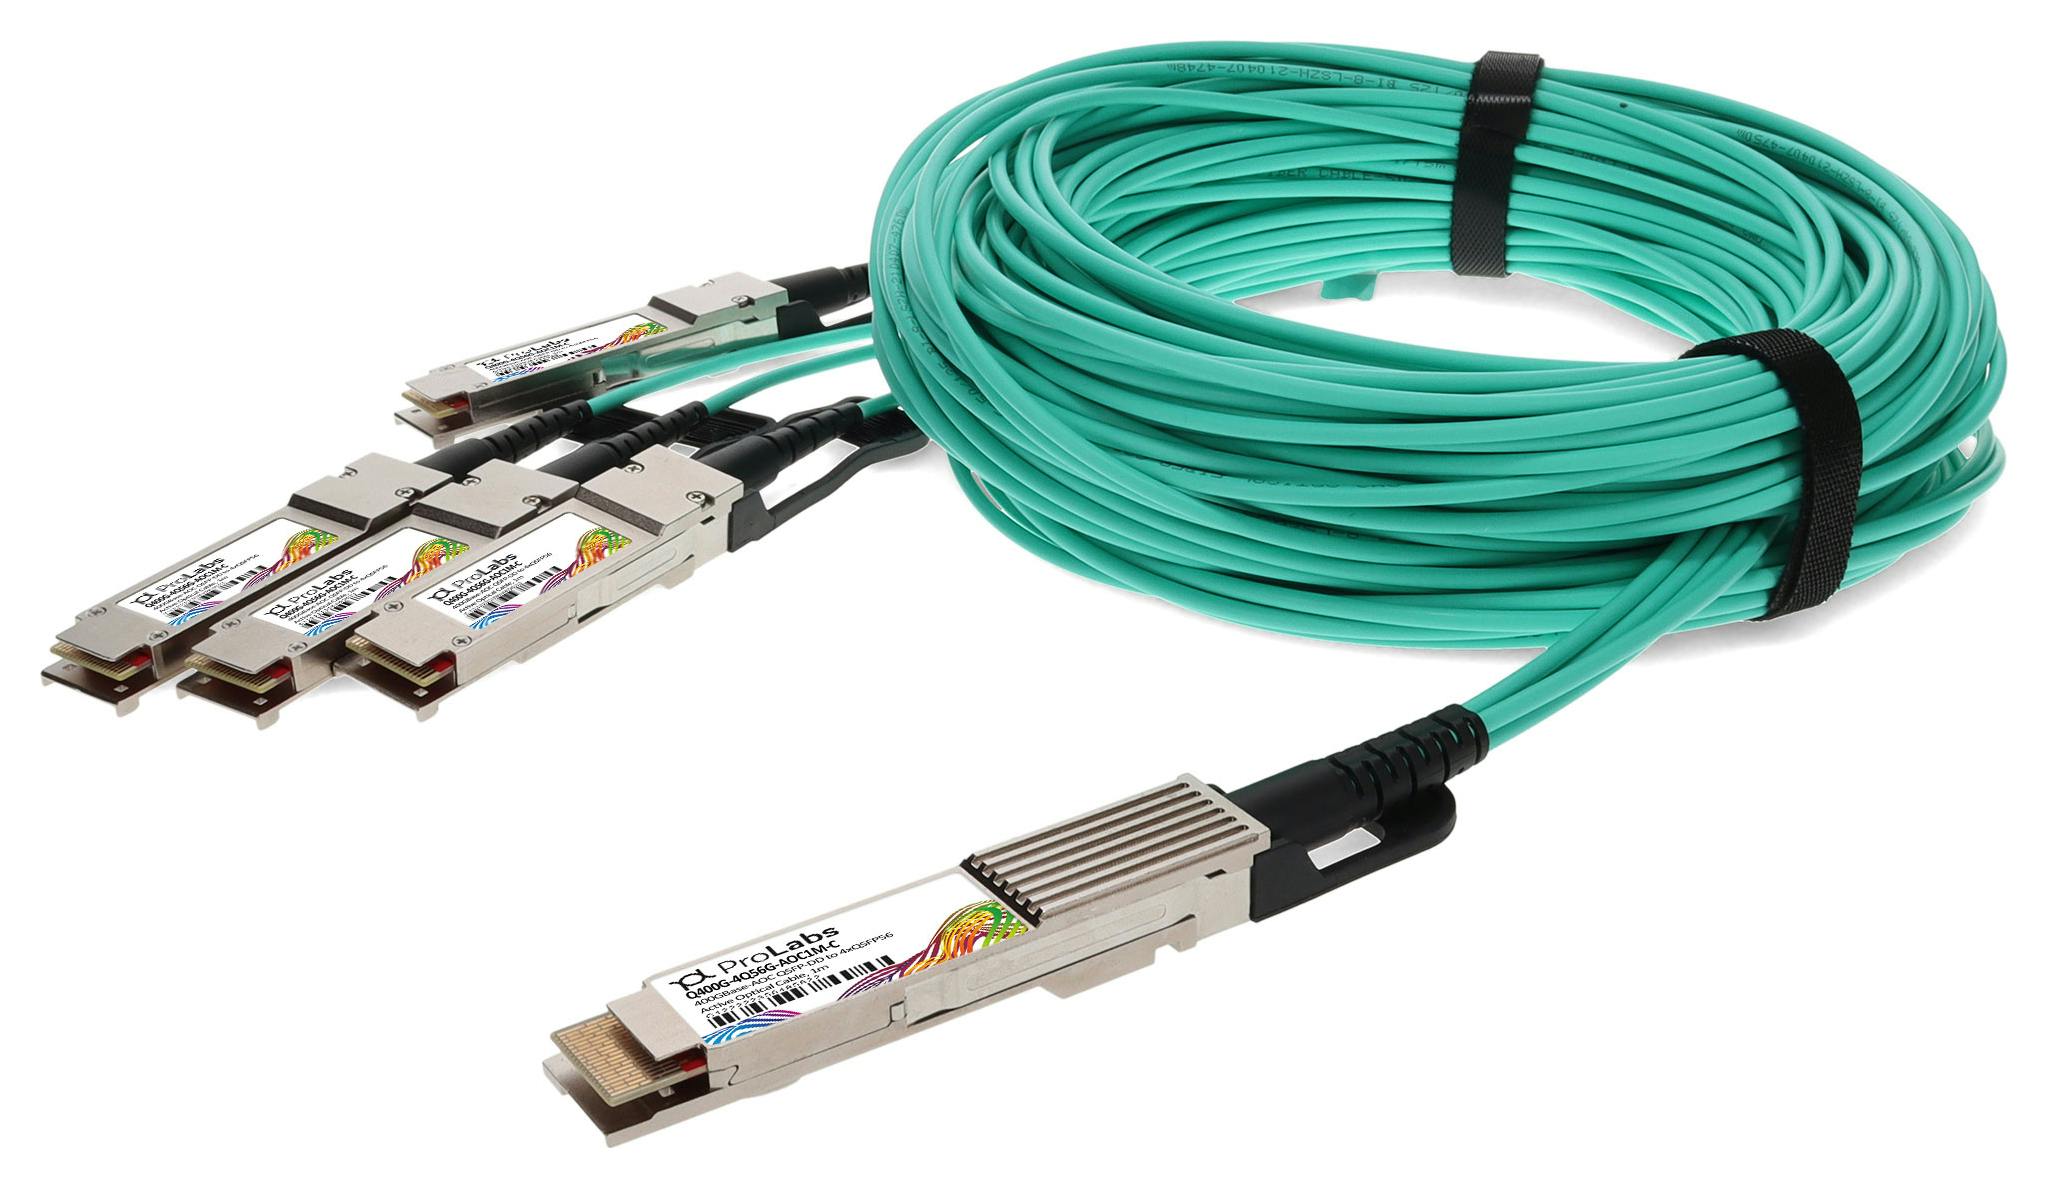 QSFP-DD breakout AOC cables from AddOn